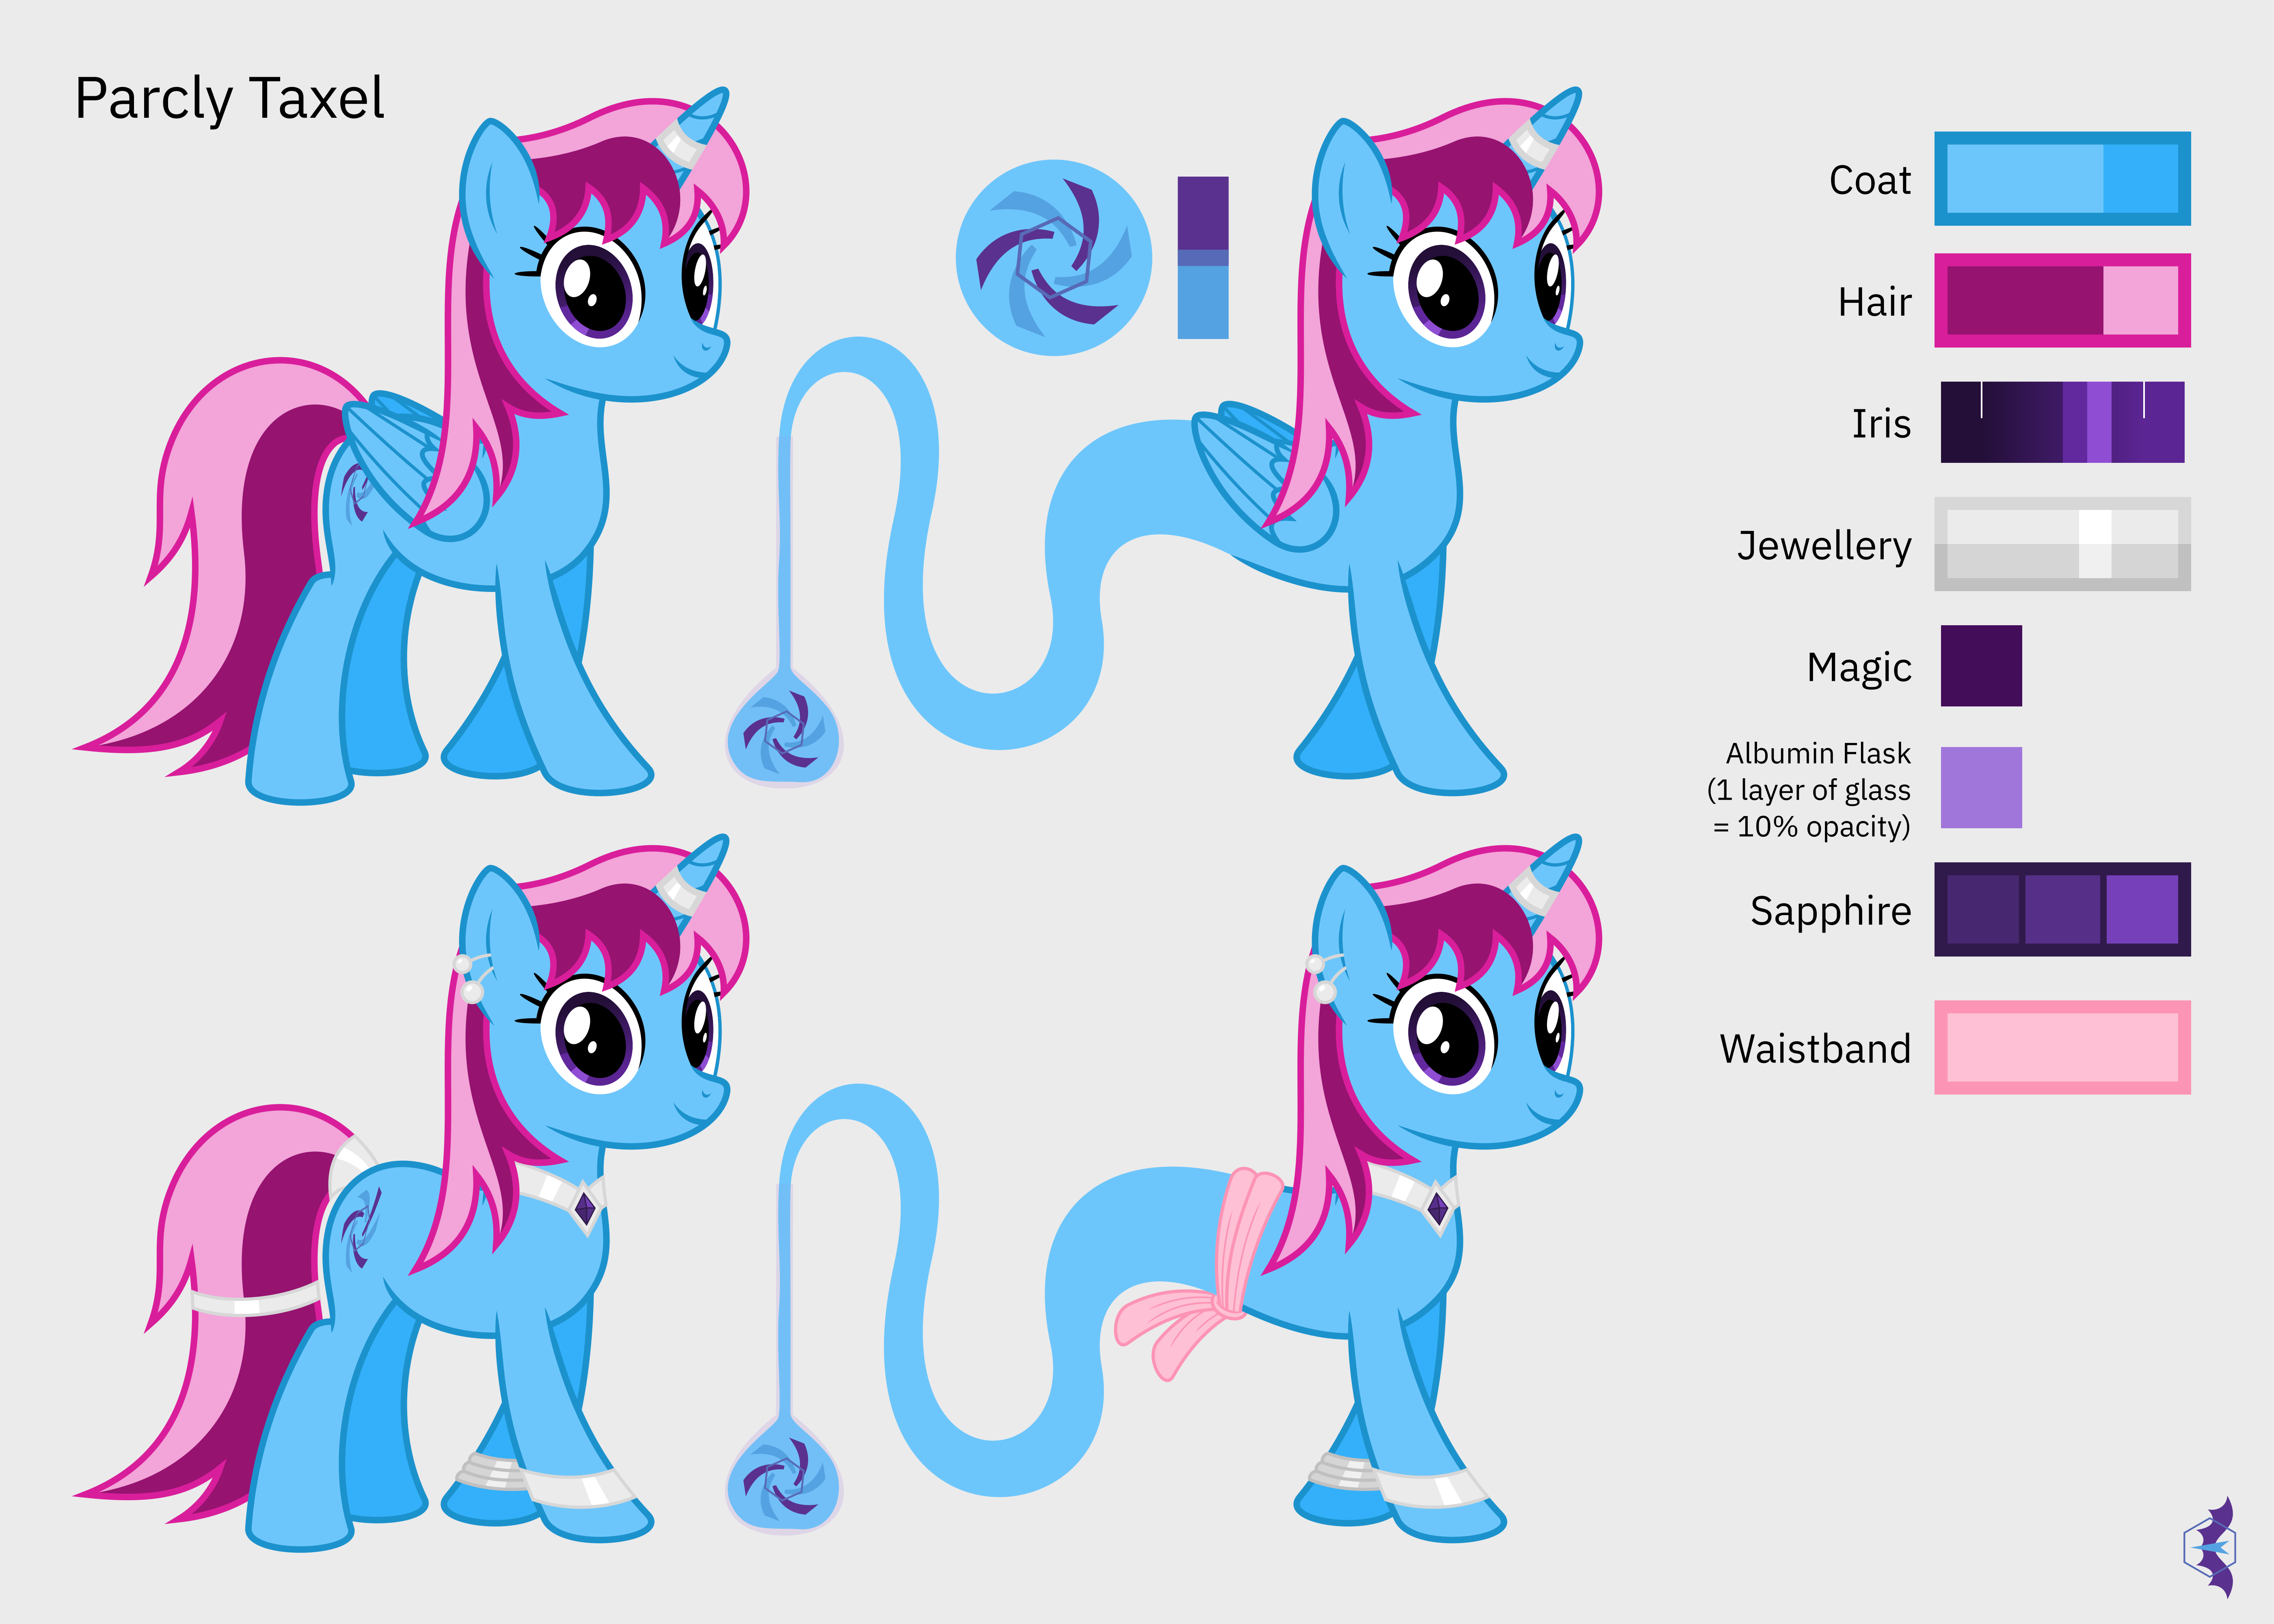 Parcly Taxel’s ref sheet